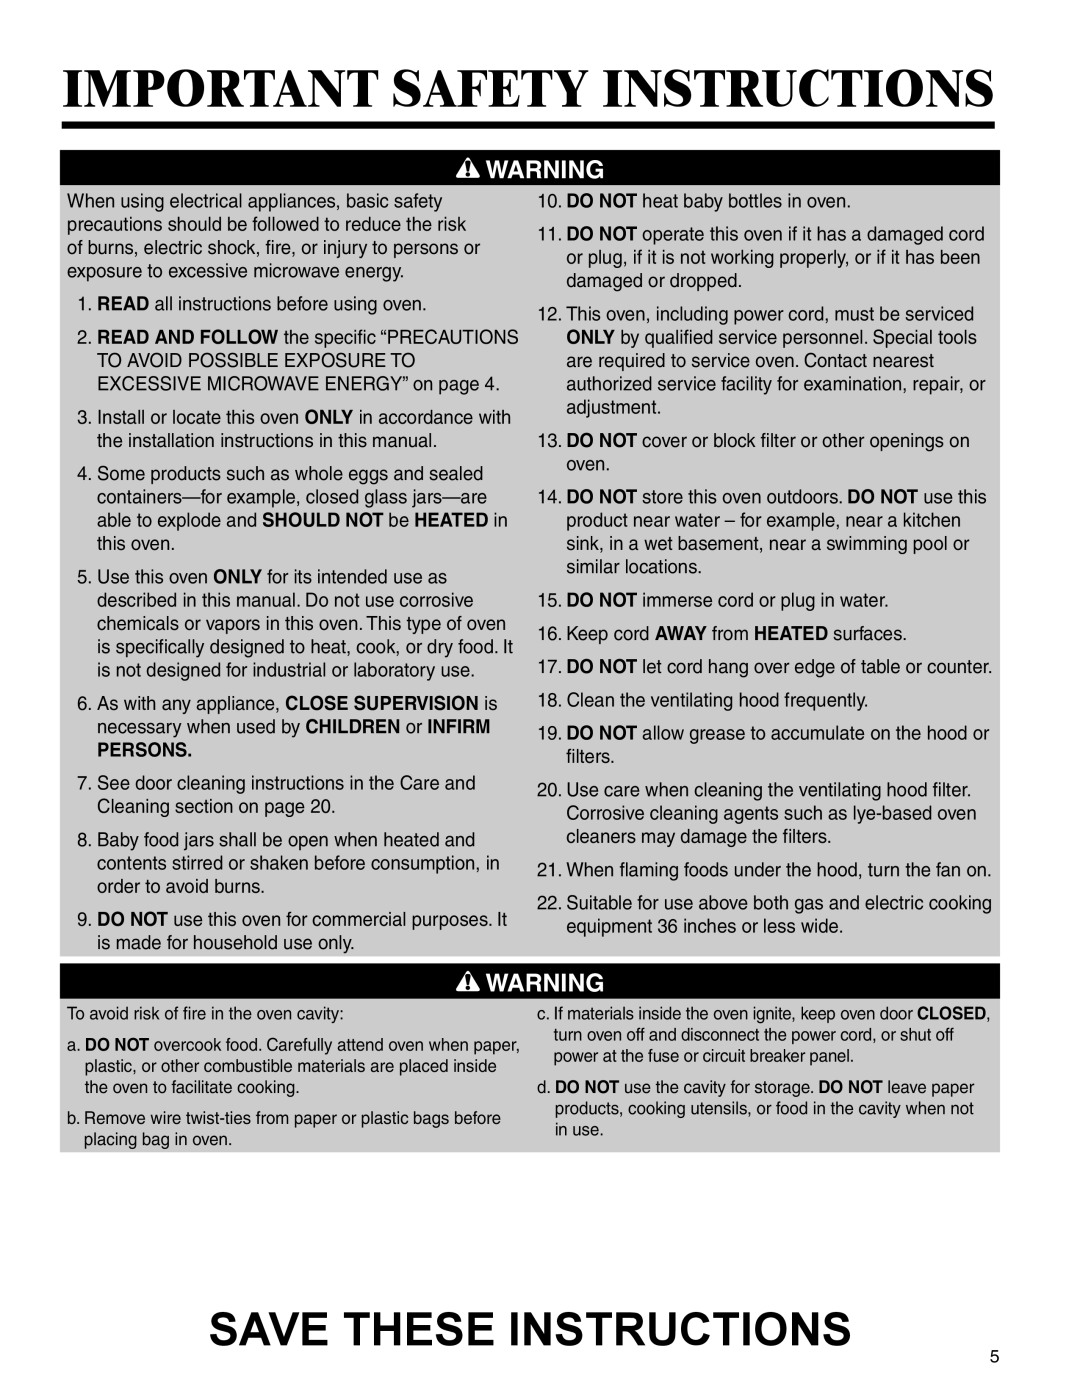 Amana AMV5164BA/BC important safety instructions Important Safety Instructions, Save These Instructions, Persons 